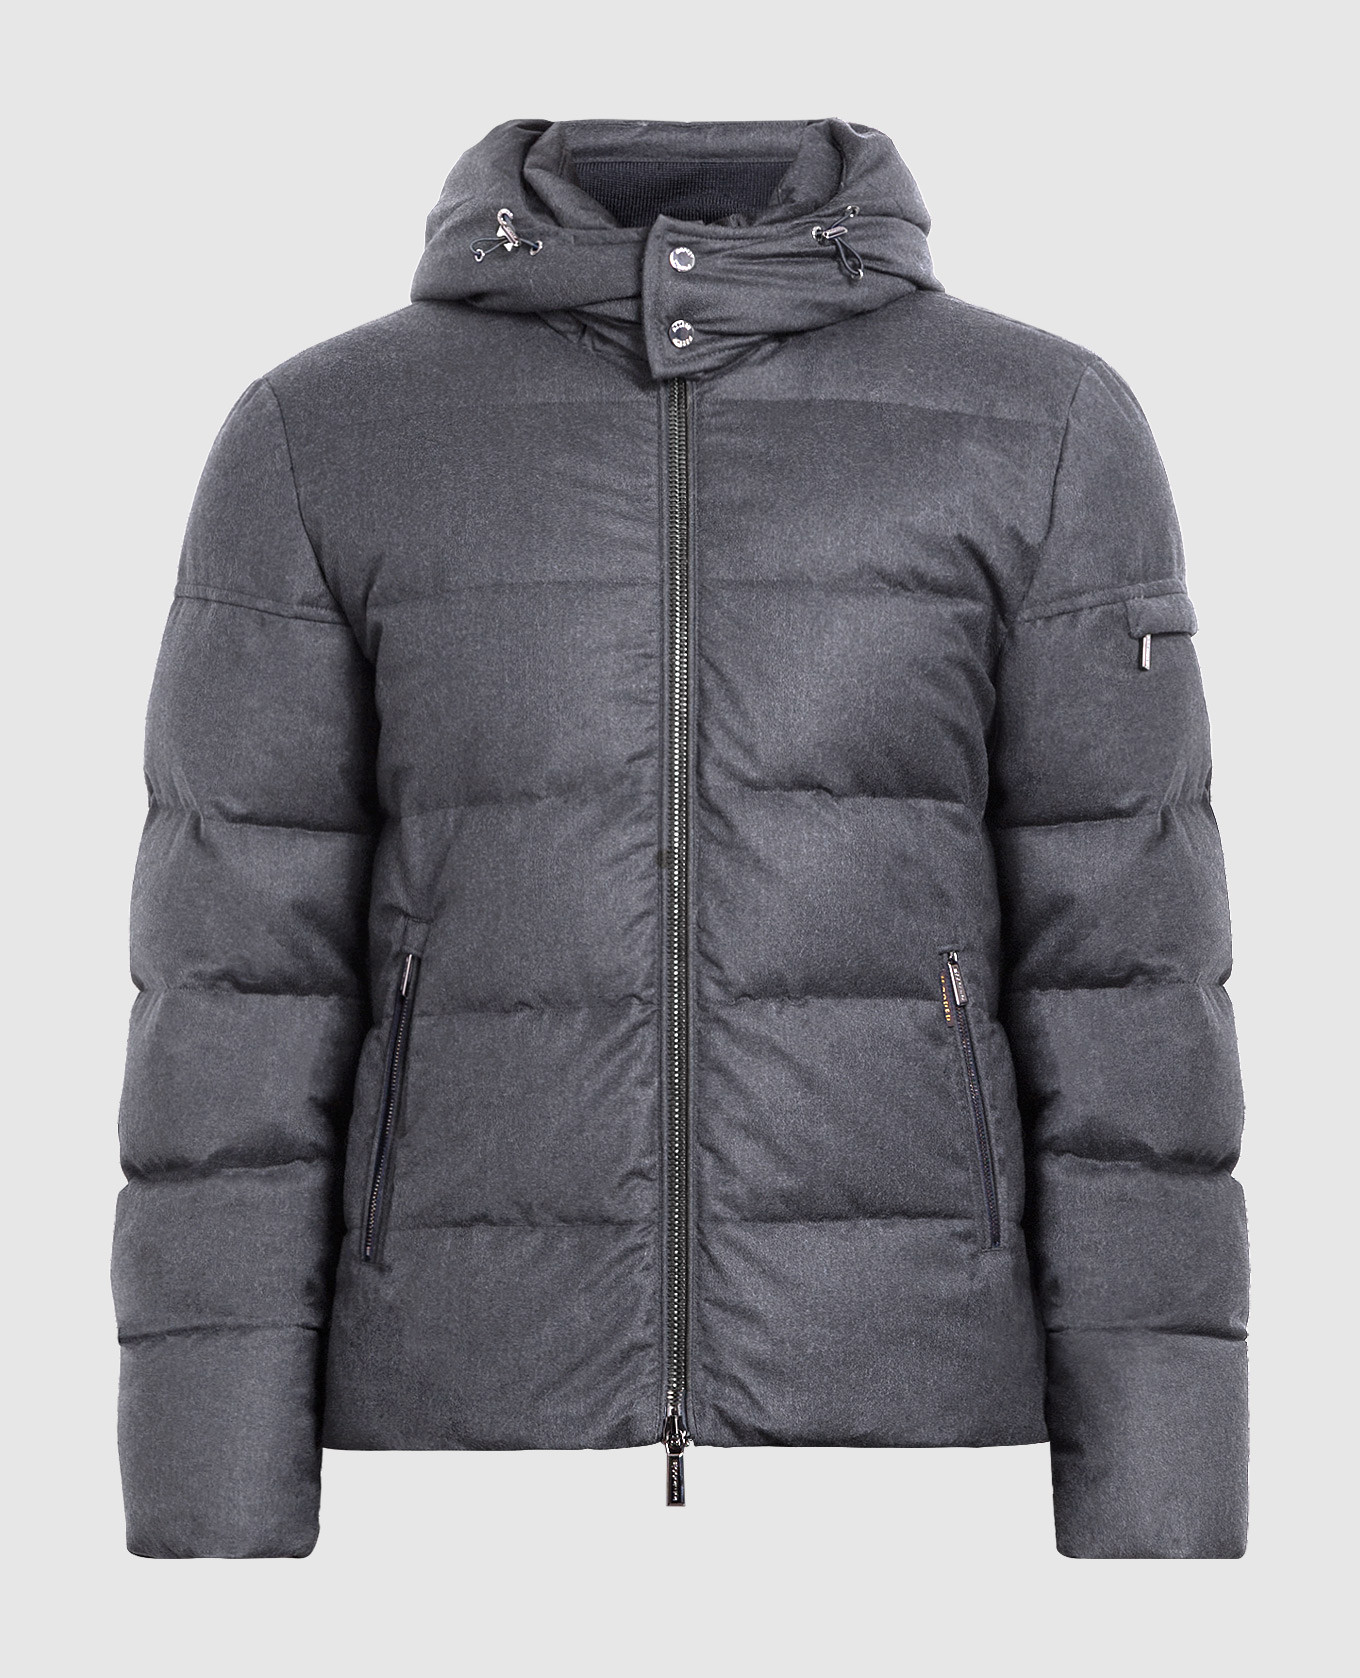 Gray down jacket made of wool and cashmere